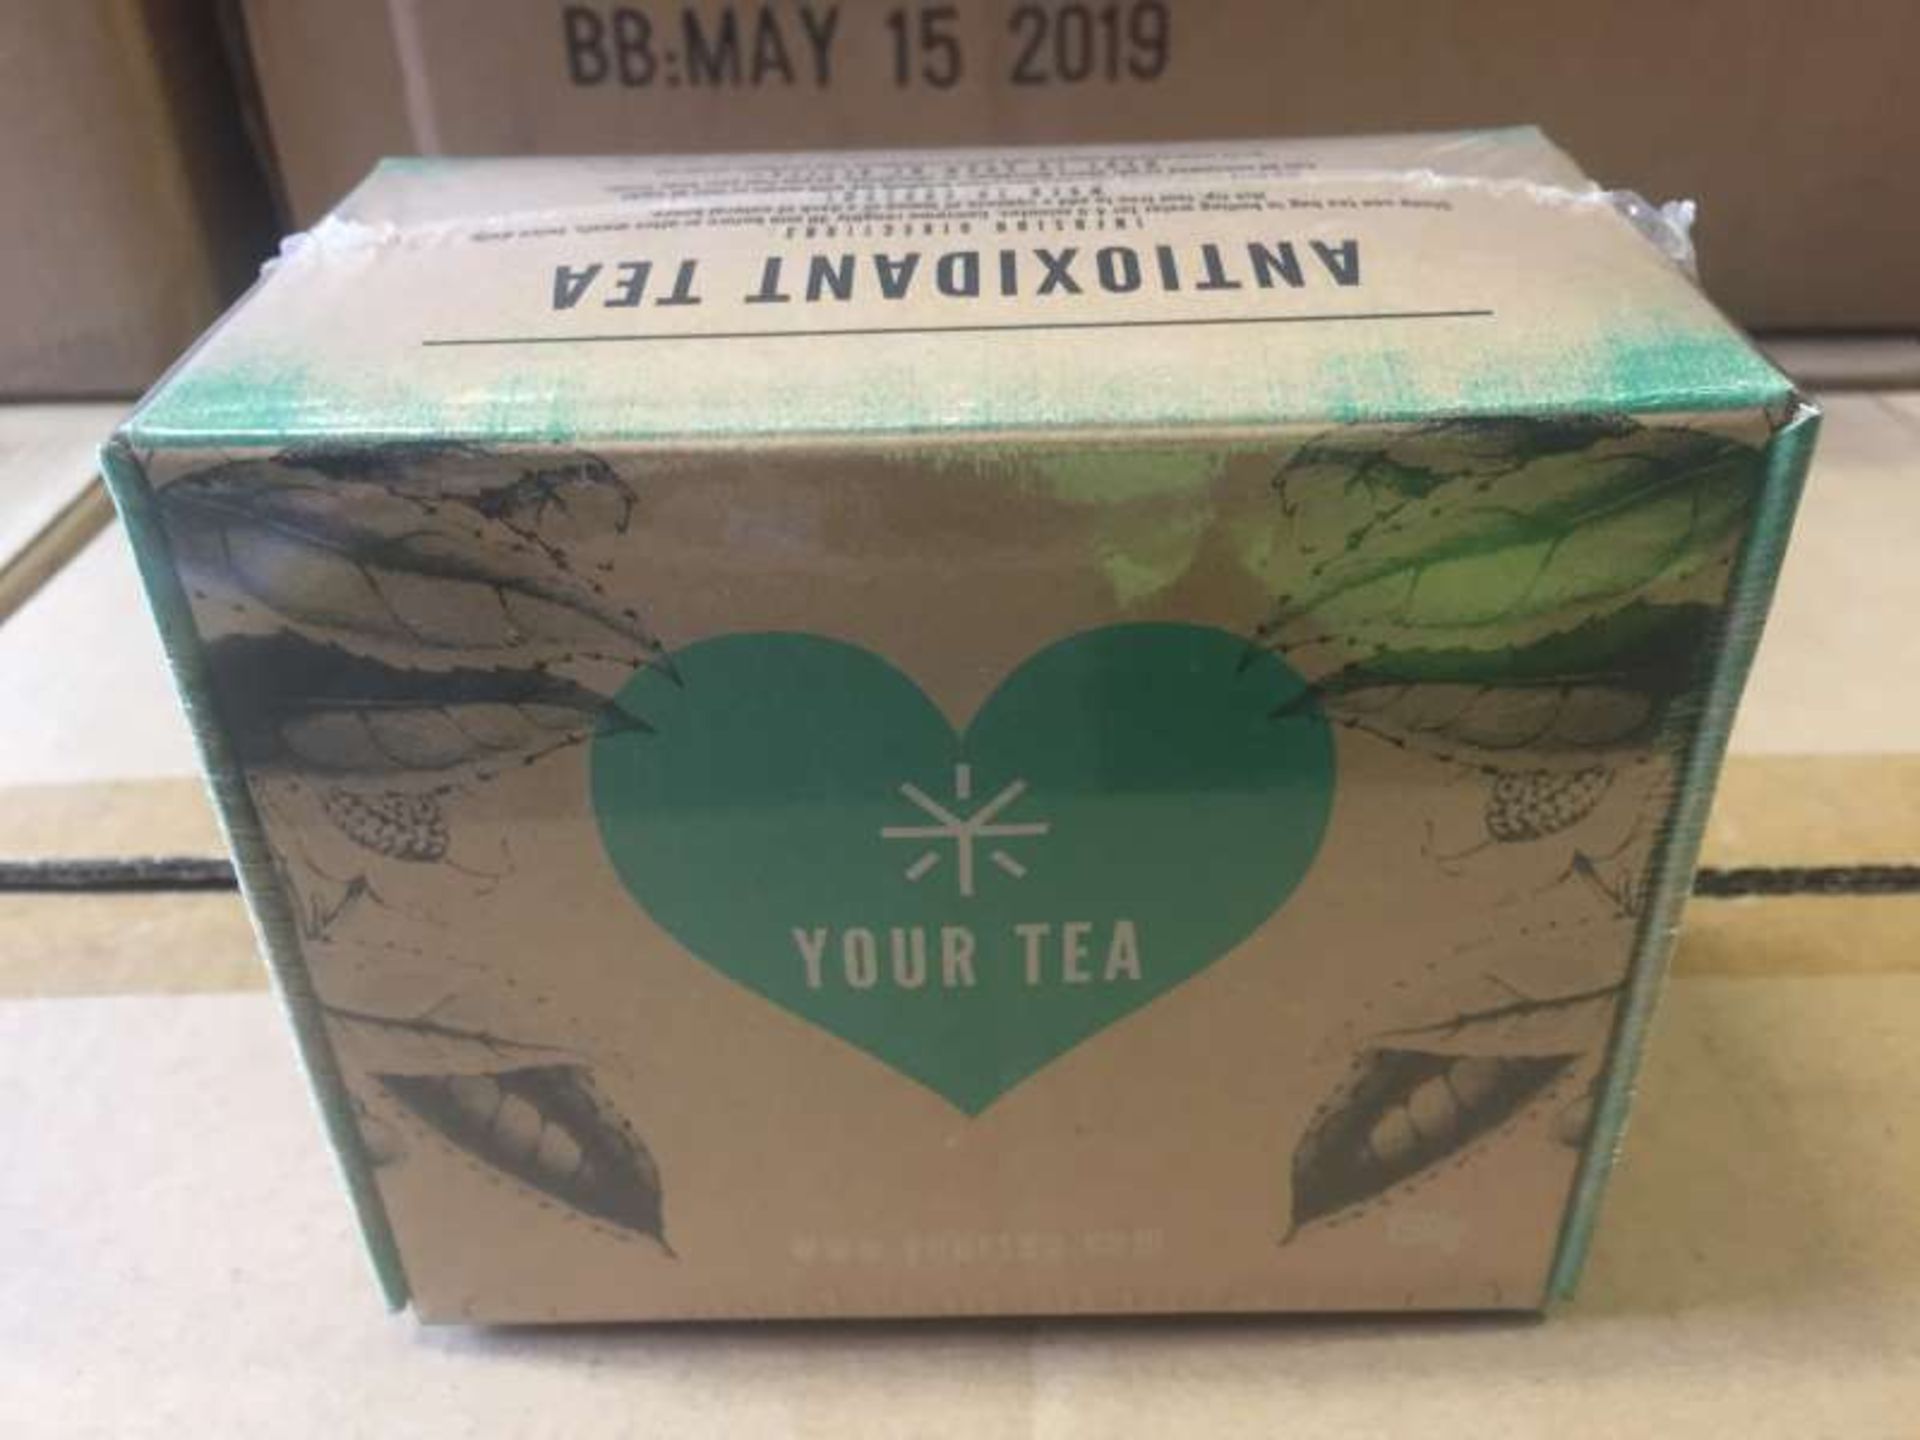 225 X BOXES OF 6 YOUR TEA ANTIOXIDANT TEABAGS EXP 05/2019 IN 5 BOXES